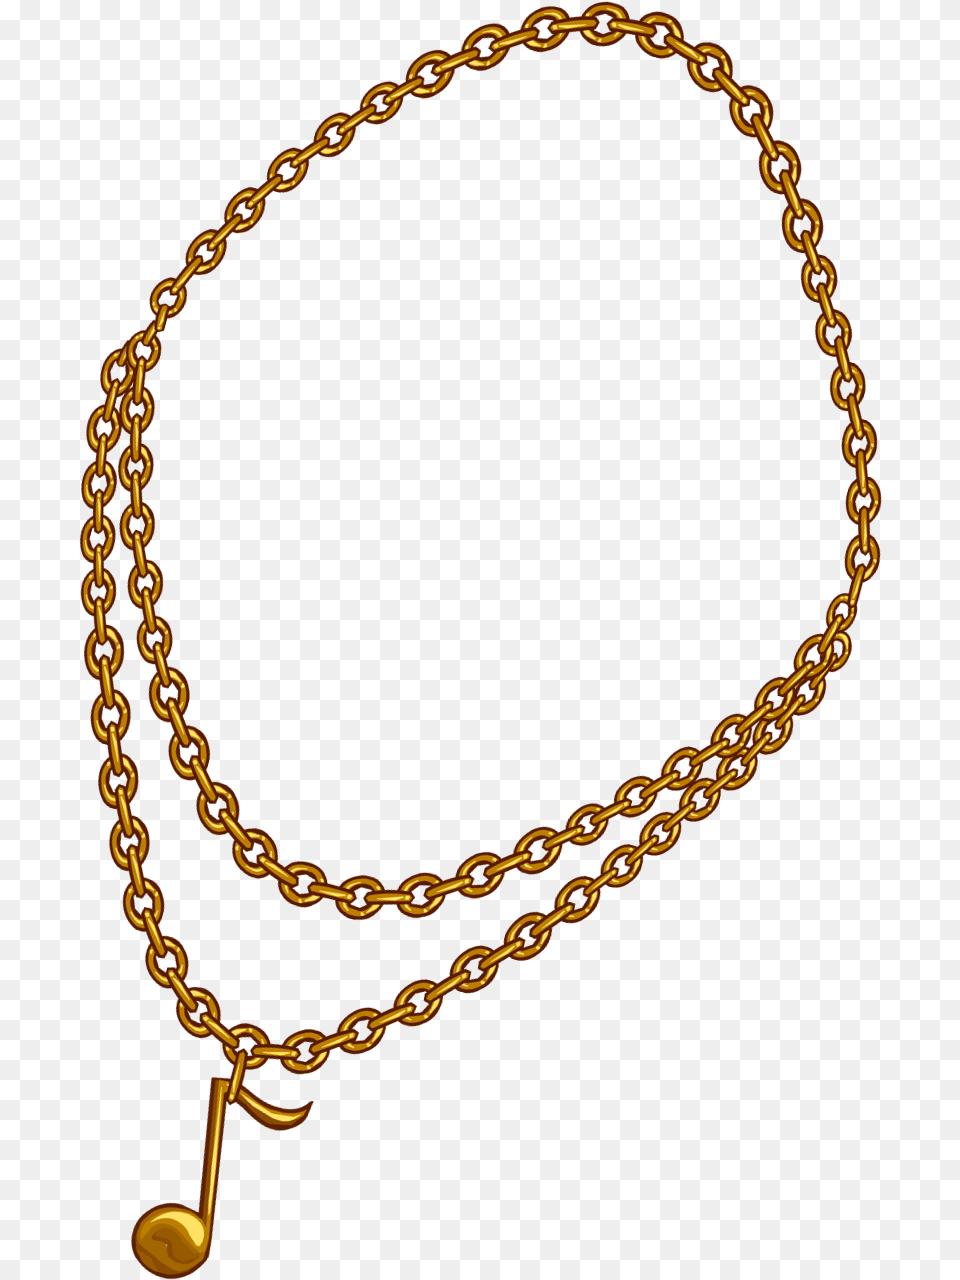 Bronze Music Note Necklace Cb Edits Chain, Accessories, Jewelry, Bracelet Free Transparent Png